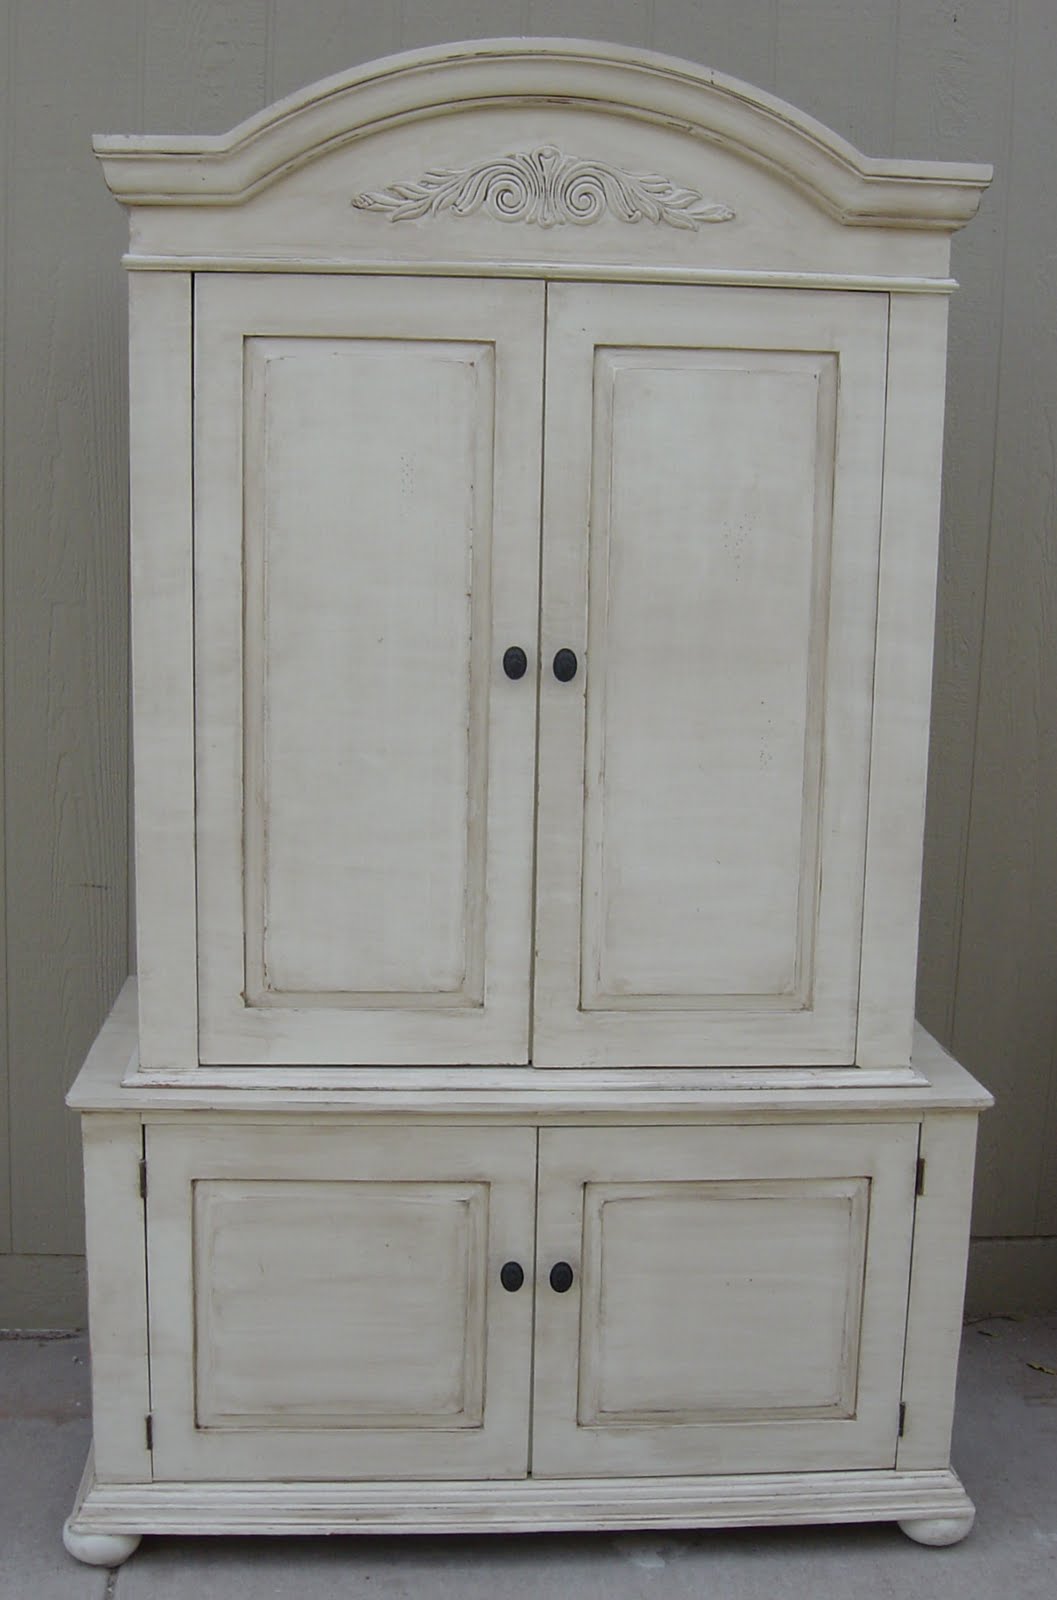 The Backyard Boutique by Five to Nine Furnishings: Creamy Shabby Chic Armoire